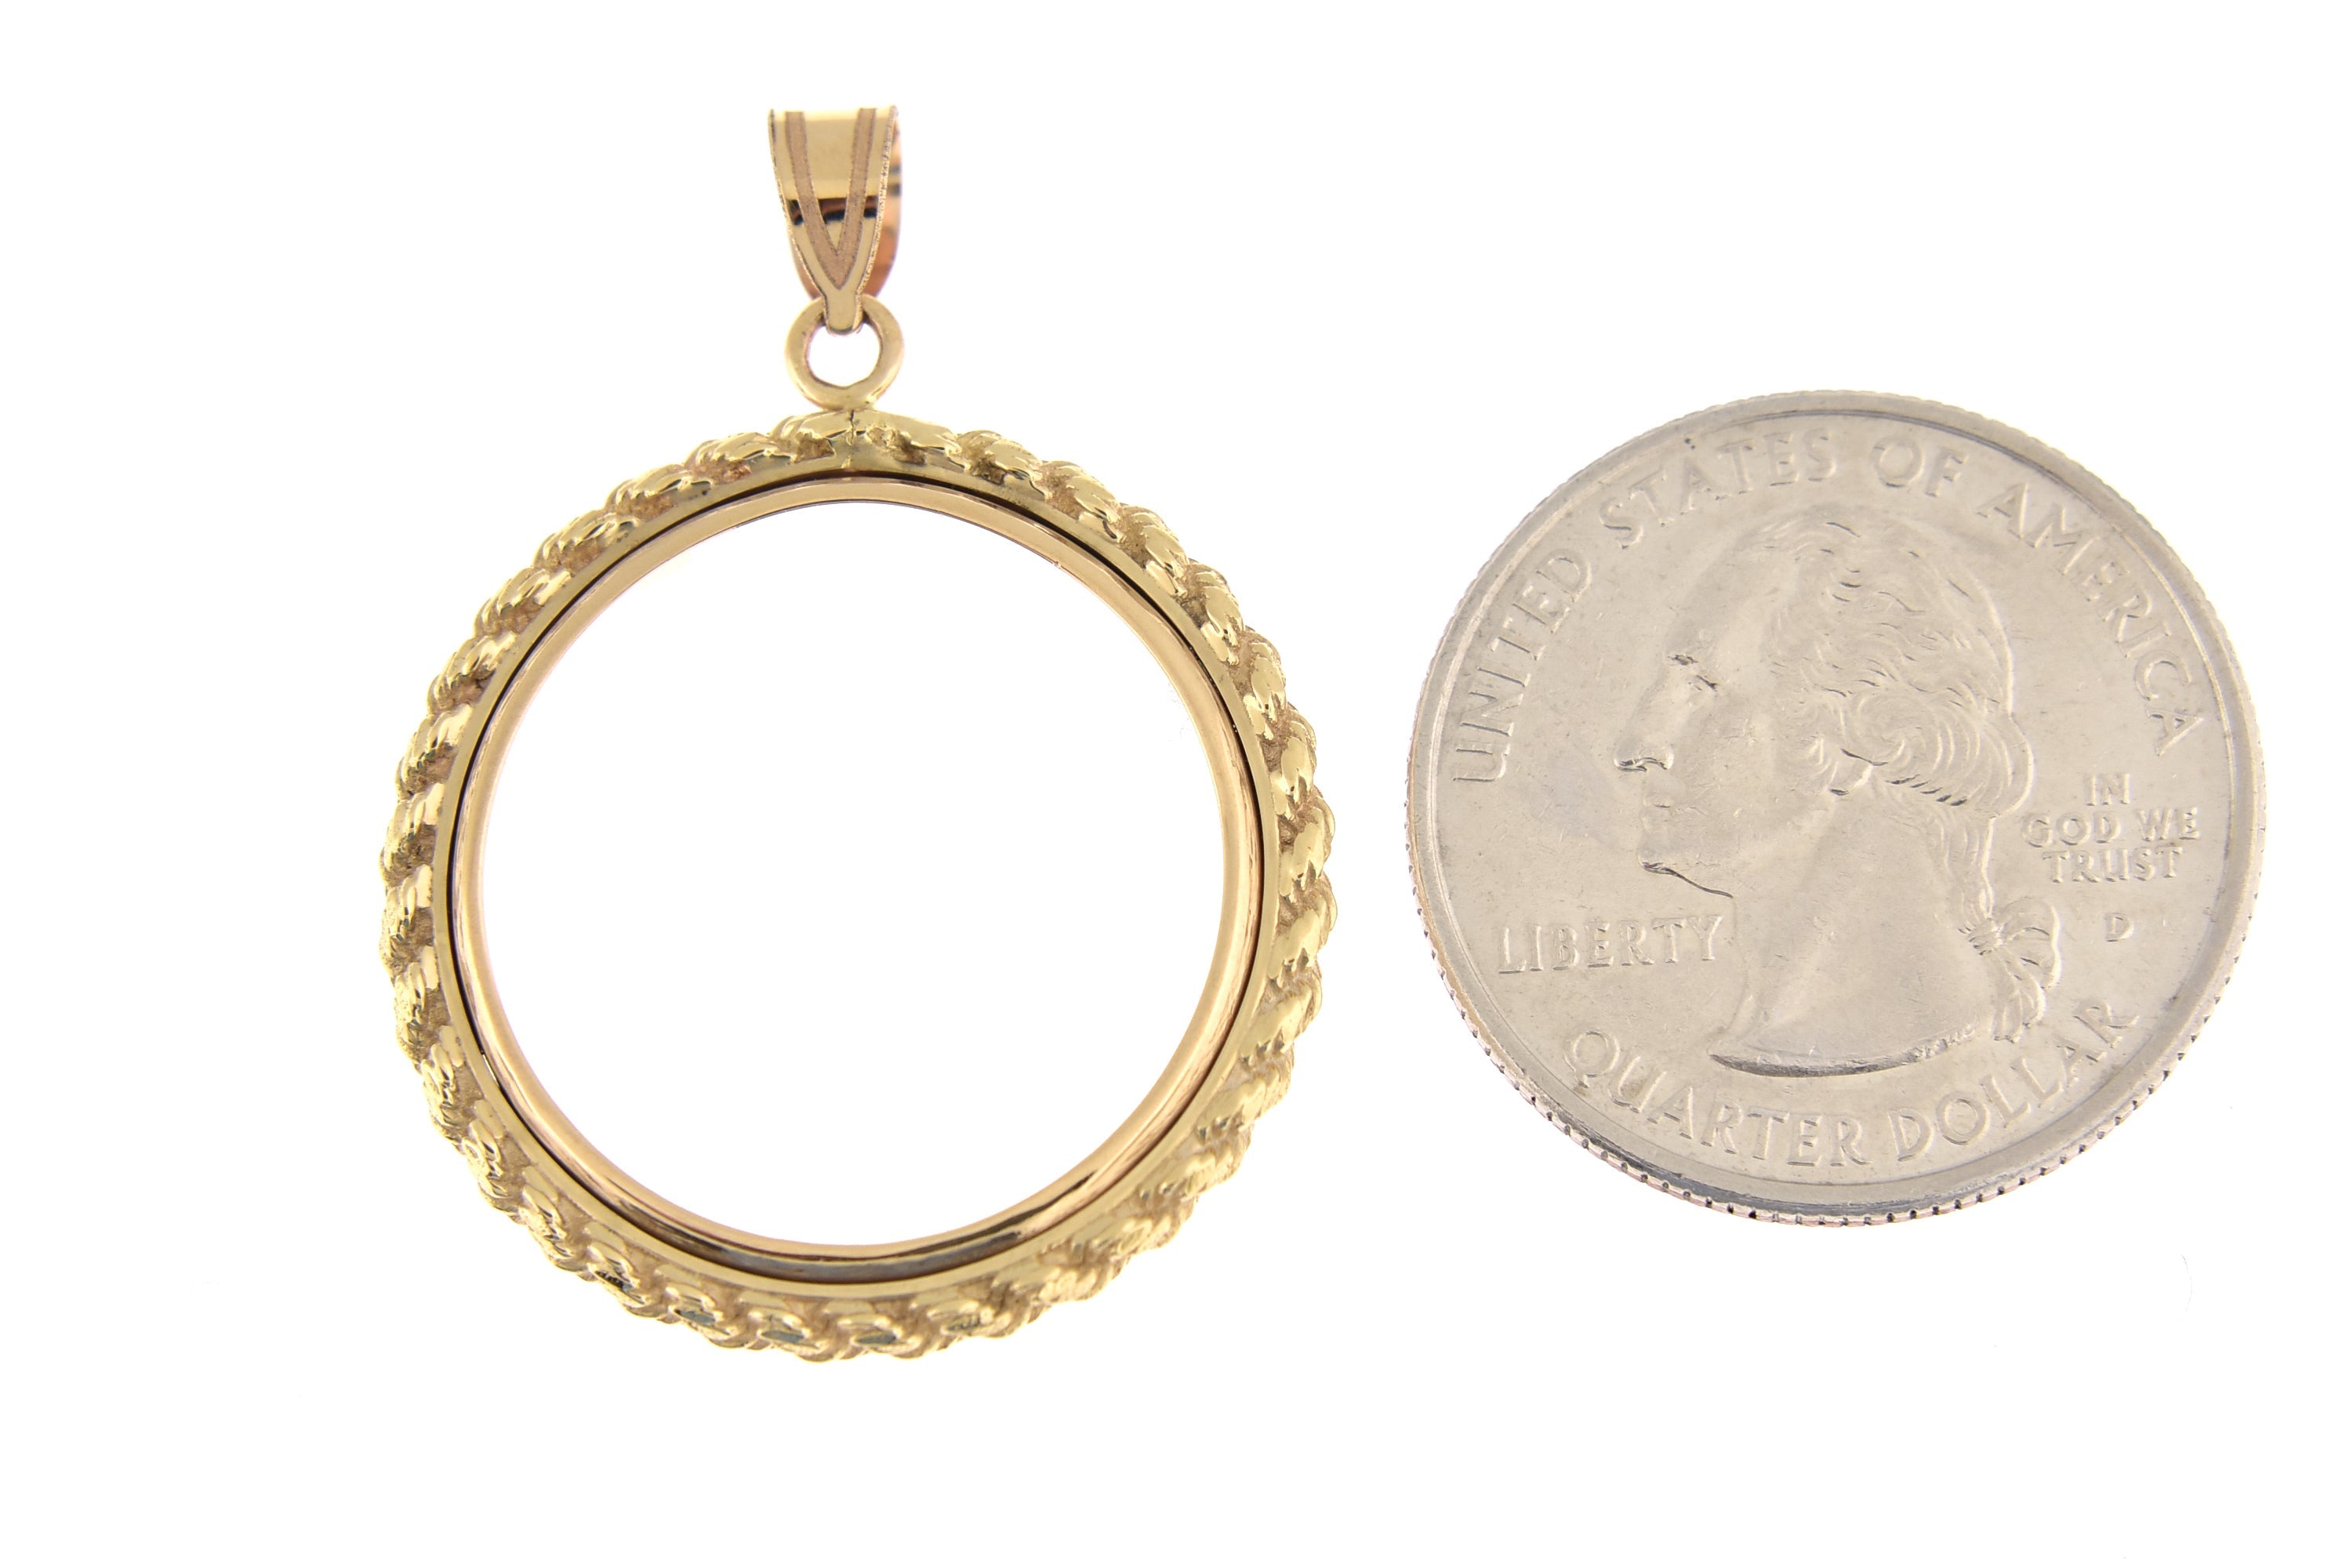 14K Yellow Gold 1/4 oz American Eagle 1/4 oz Panda US $5 Dollar Jamestown 2 Rand Coin Holder Holds 22mm Coins Rope Polished Prong Pendant Charm